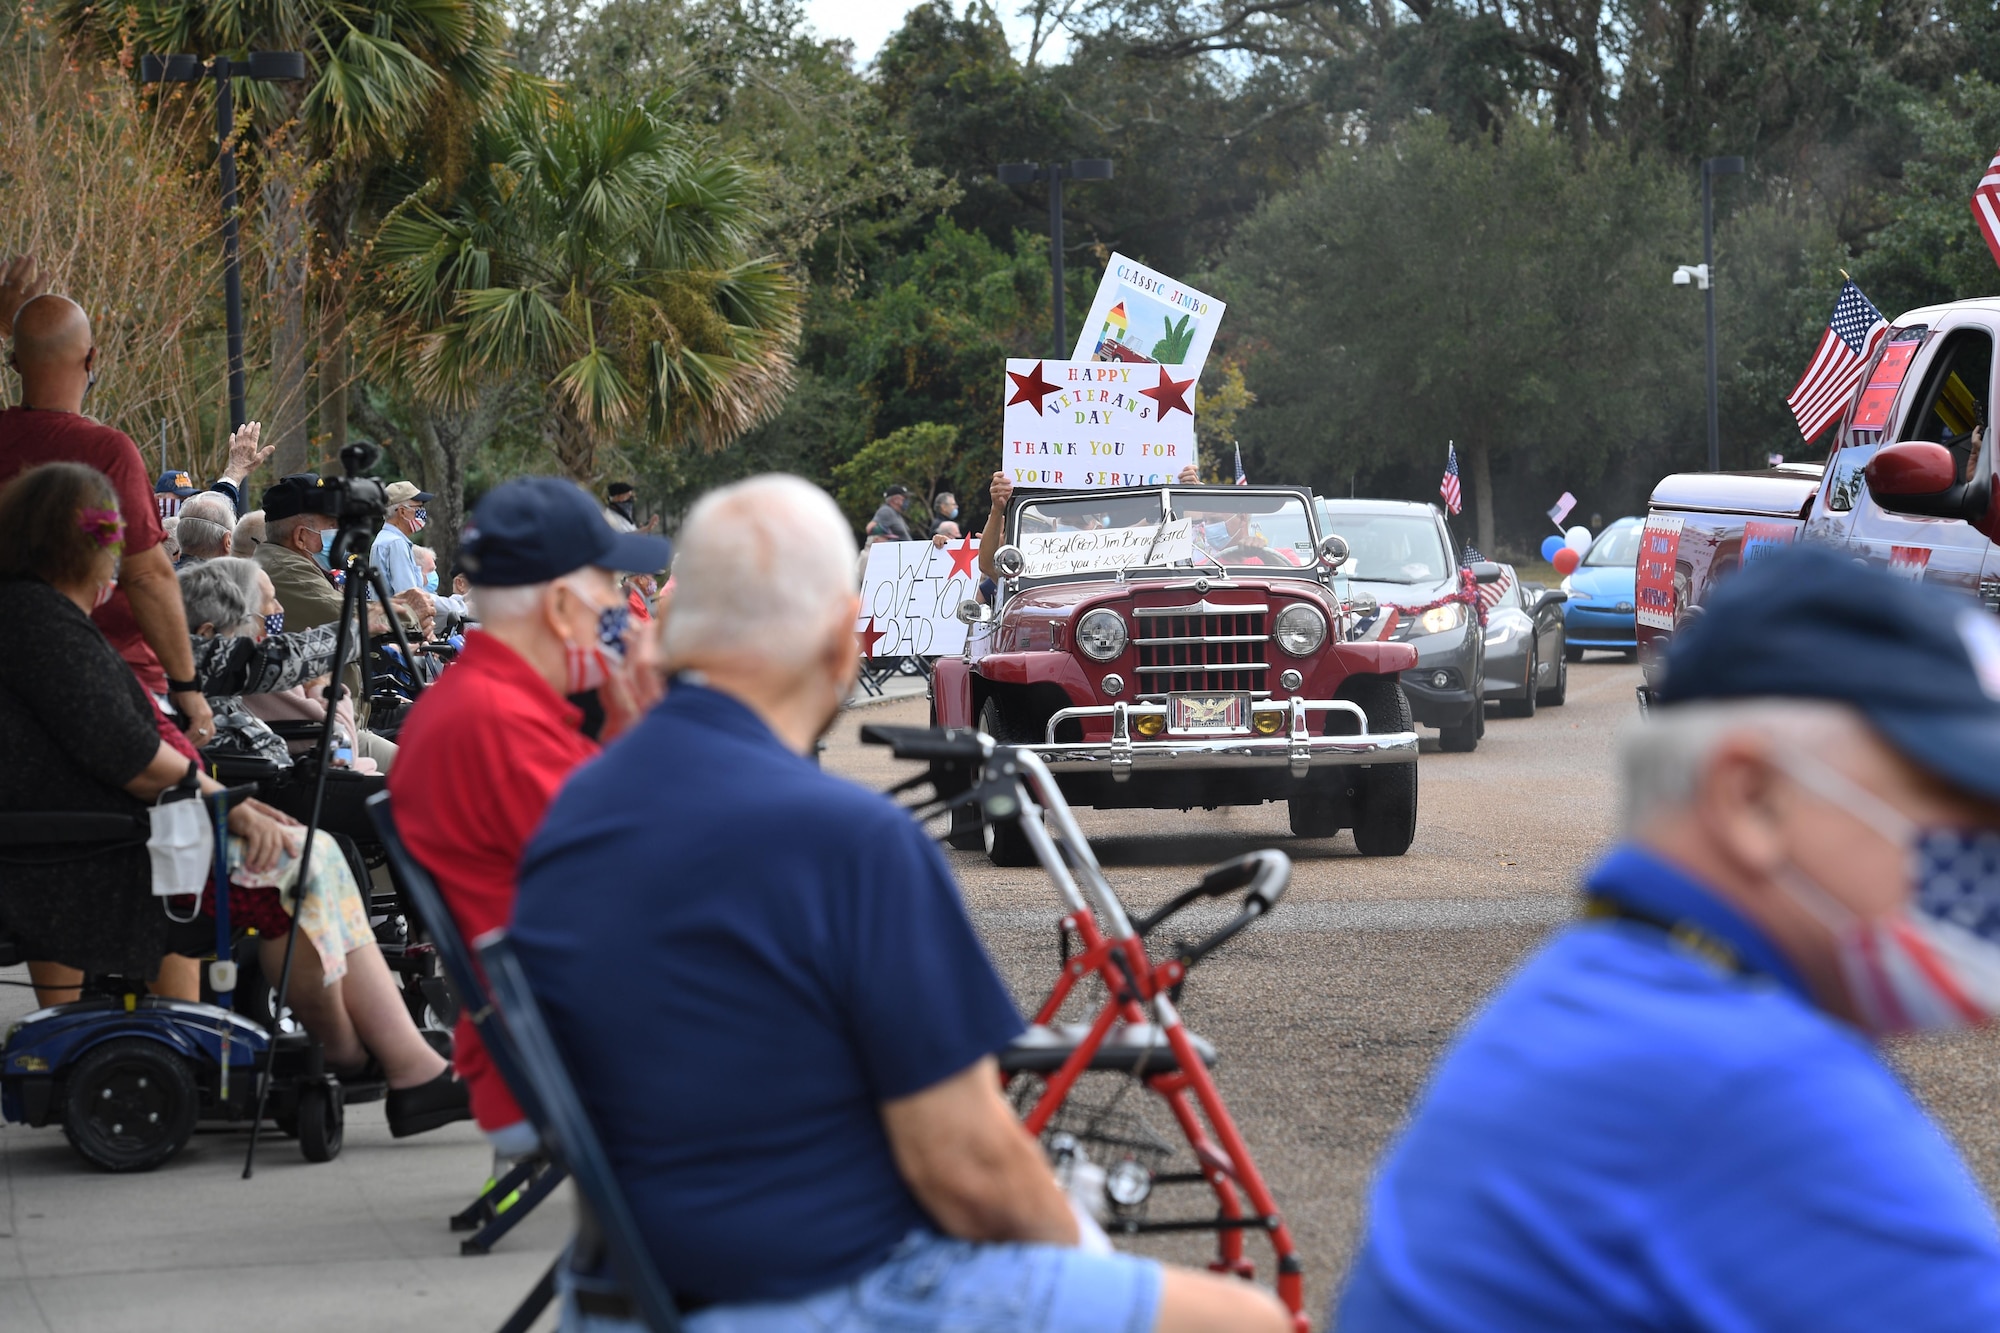 Gulf Coast veterans participate in the Gulf Coast Veteran's Day Roll-Thru and Wave Parade outside the Armed Forces Retirement Home at Gulfport, Mississippi, Nov. 7, 2020. Keesler Air Force Base leadership participated in the parade in support of all veterans past and present. (U.S. Air Force photo by Kemberly Groue)